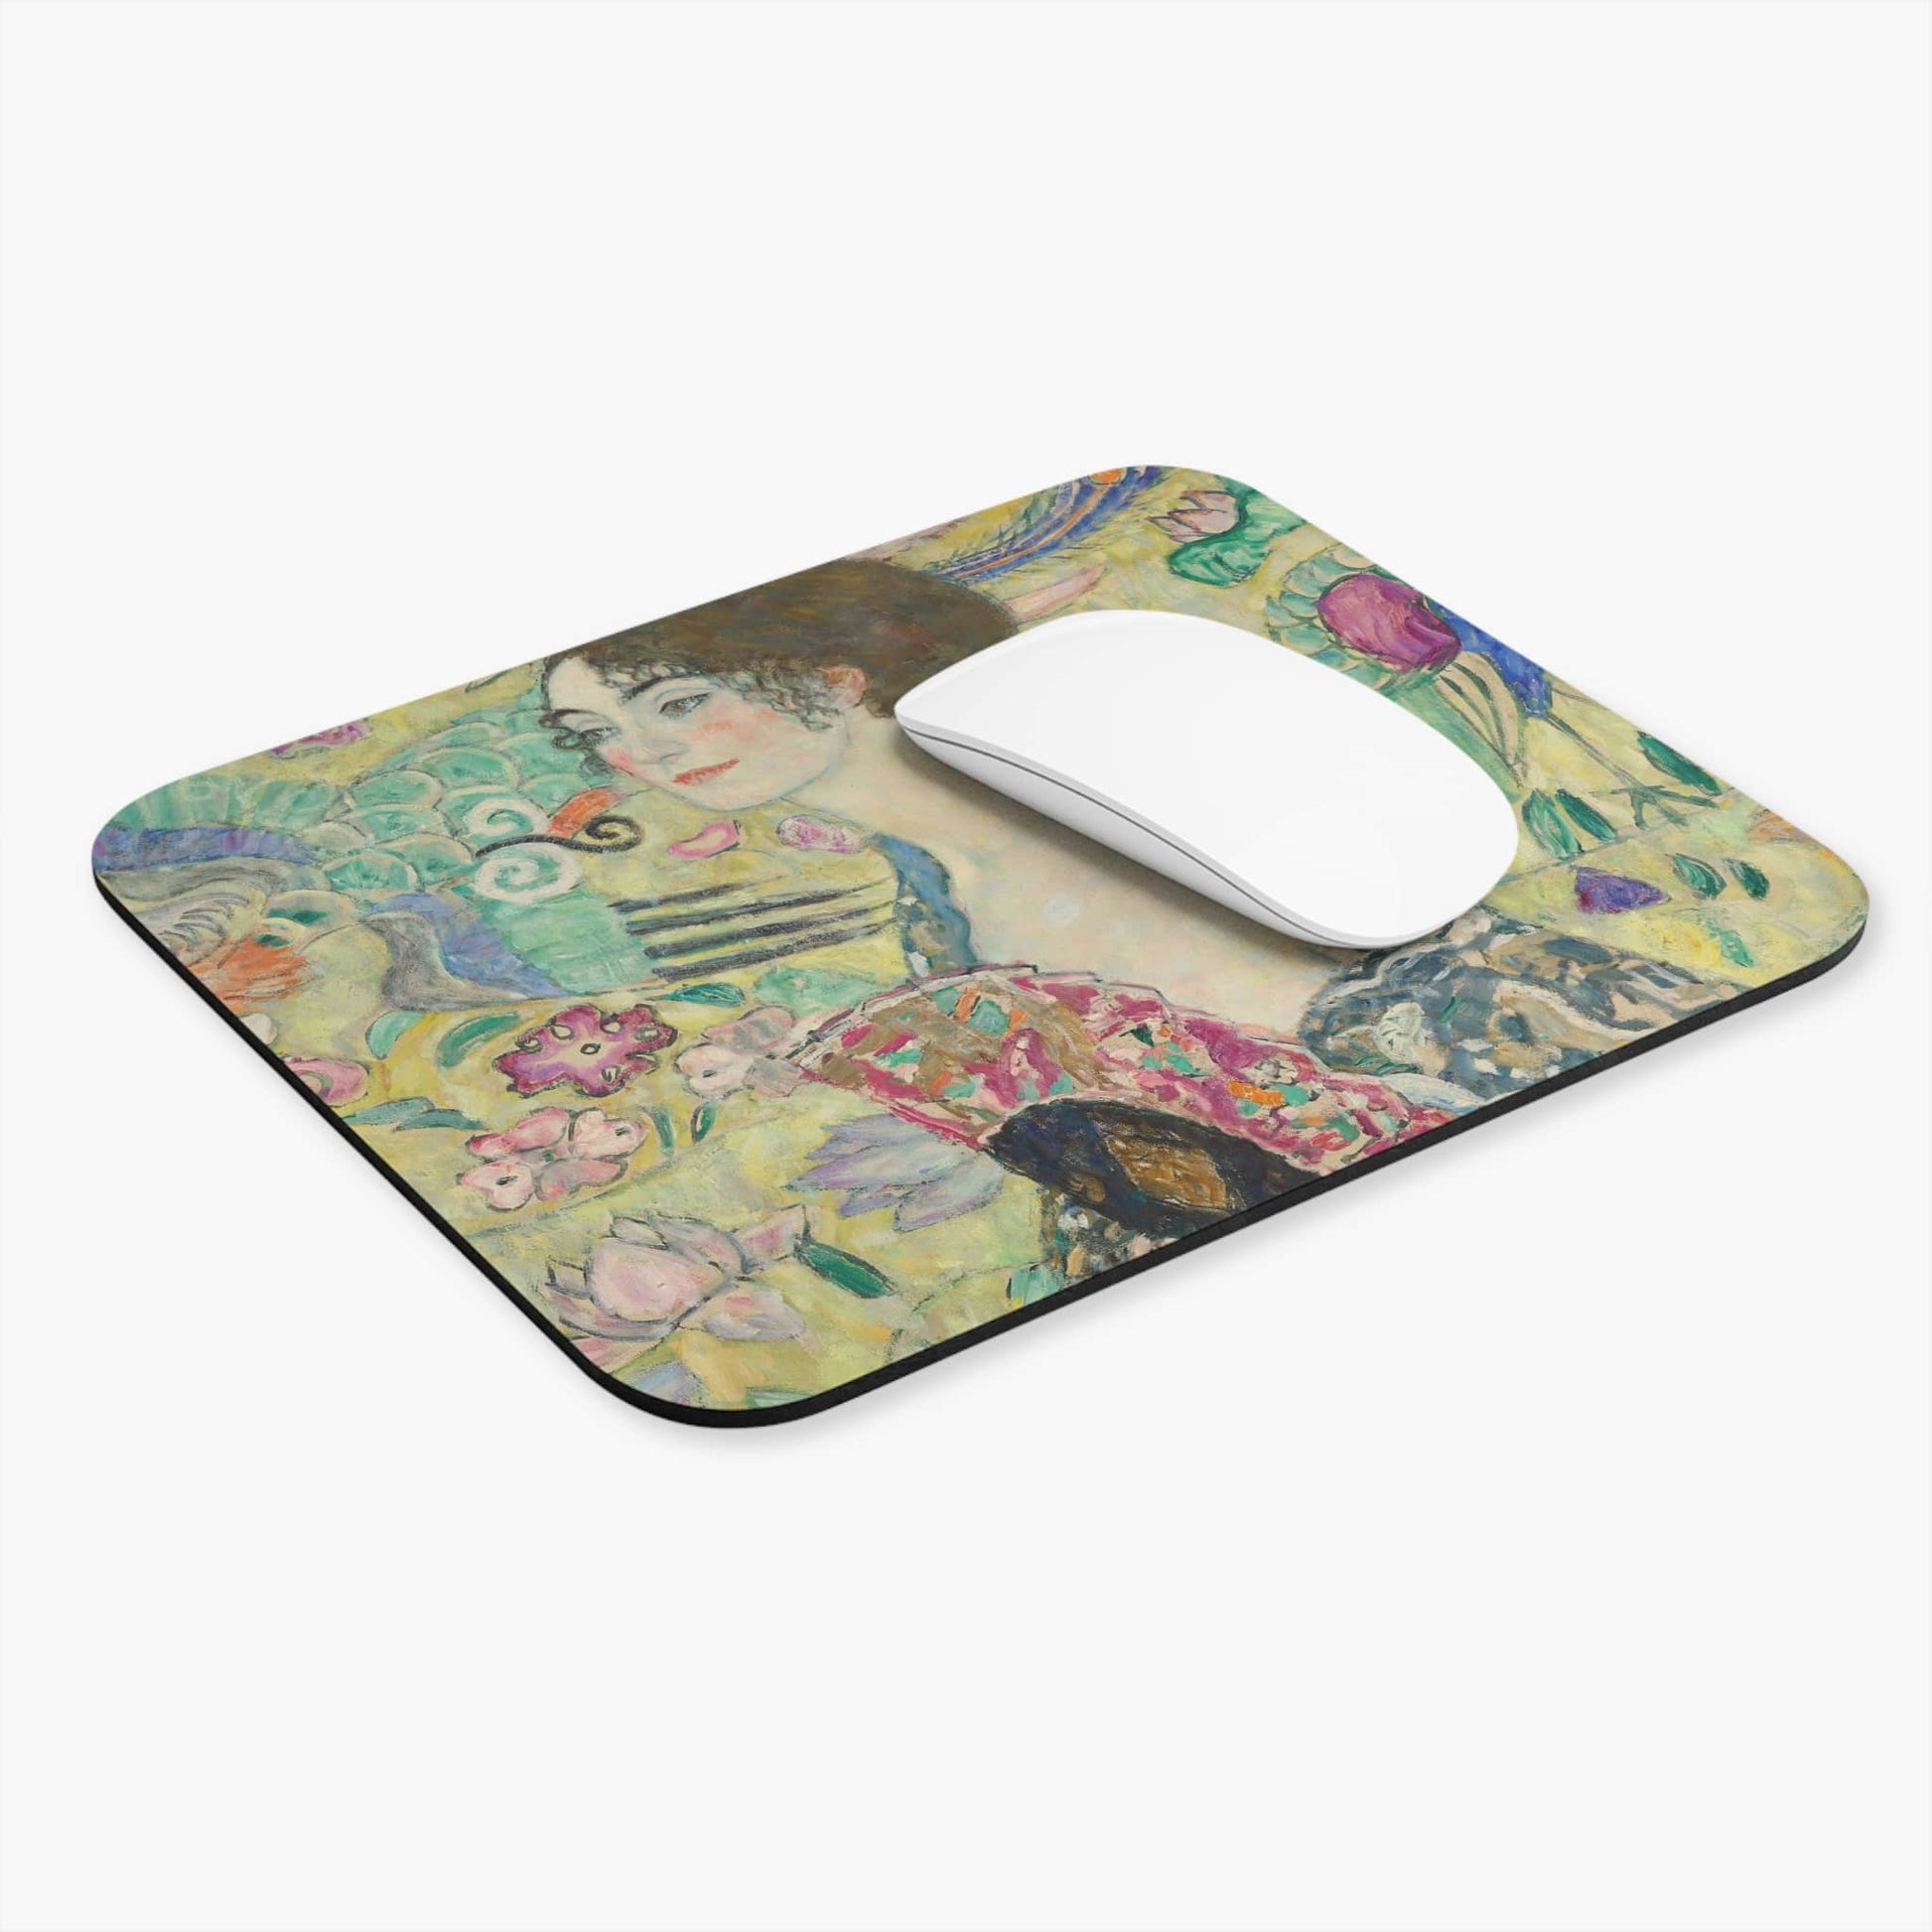 Whimsical Computer Desk Mouse Pad With White Mouse